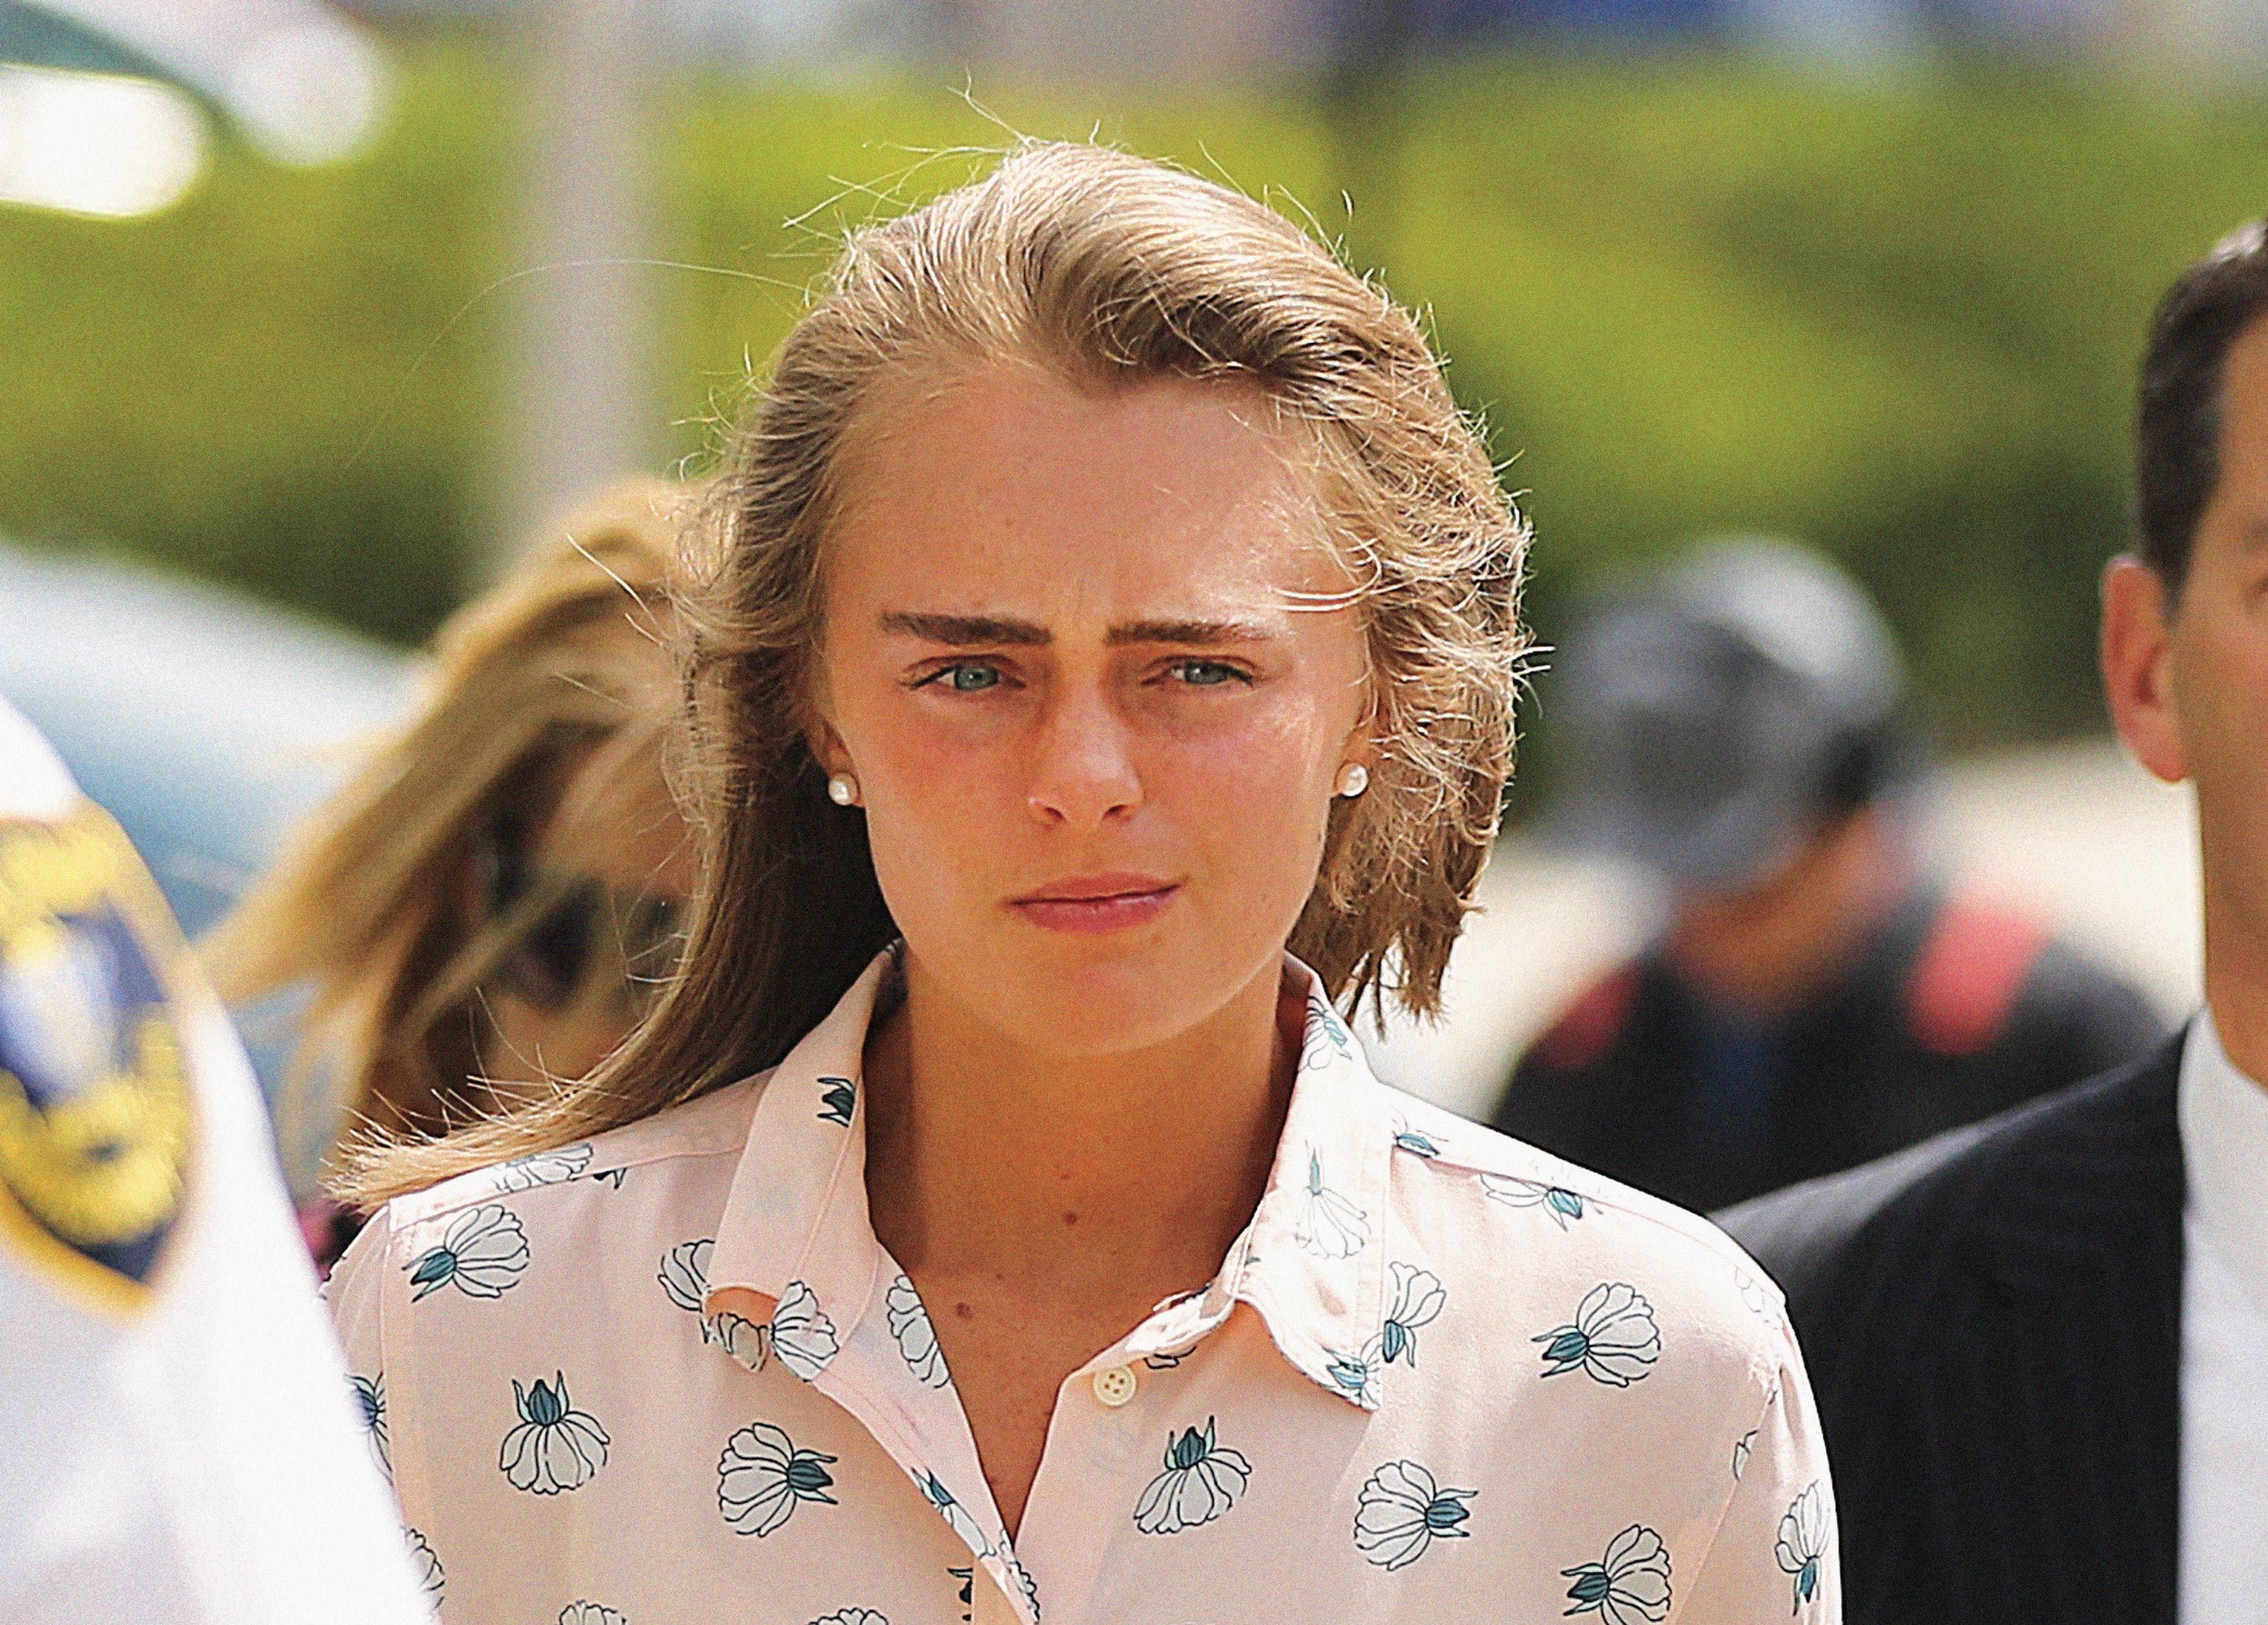 Behind the Scenes of the Michelle Carter Verdict